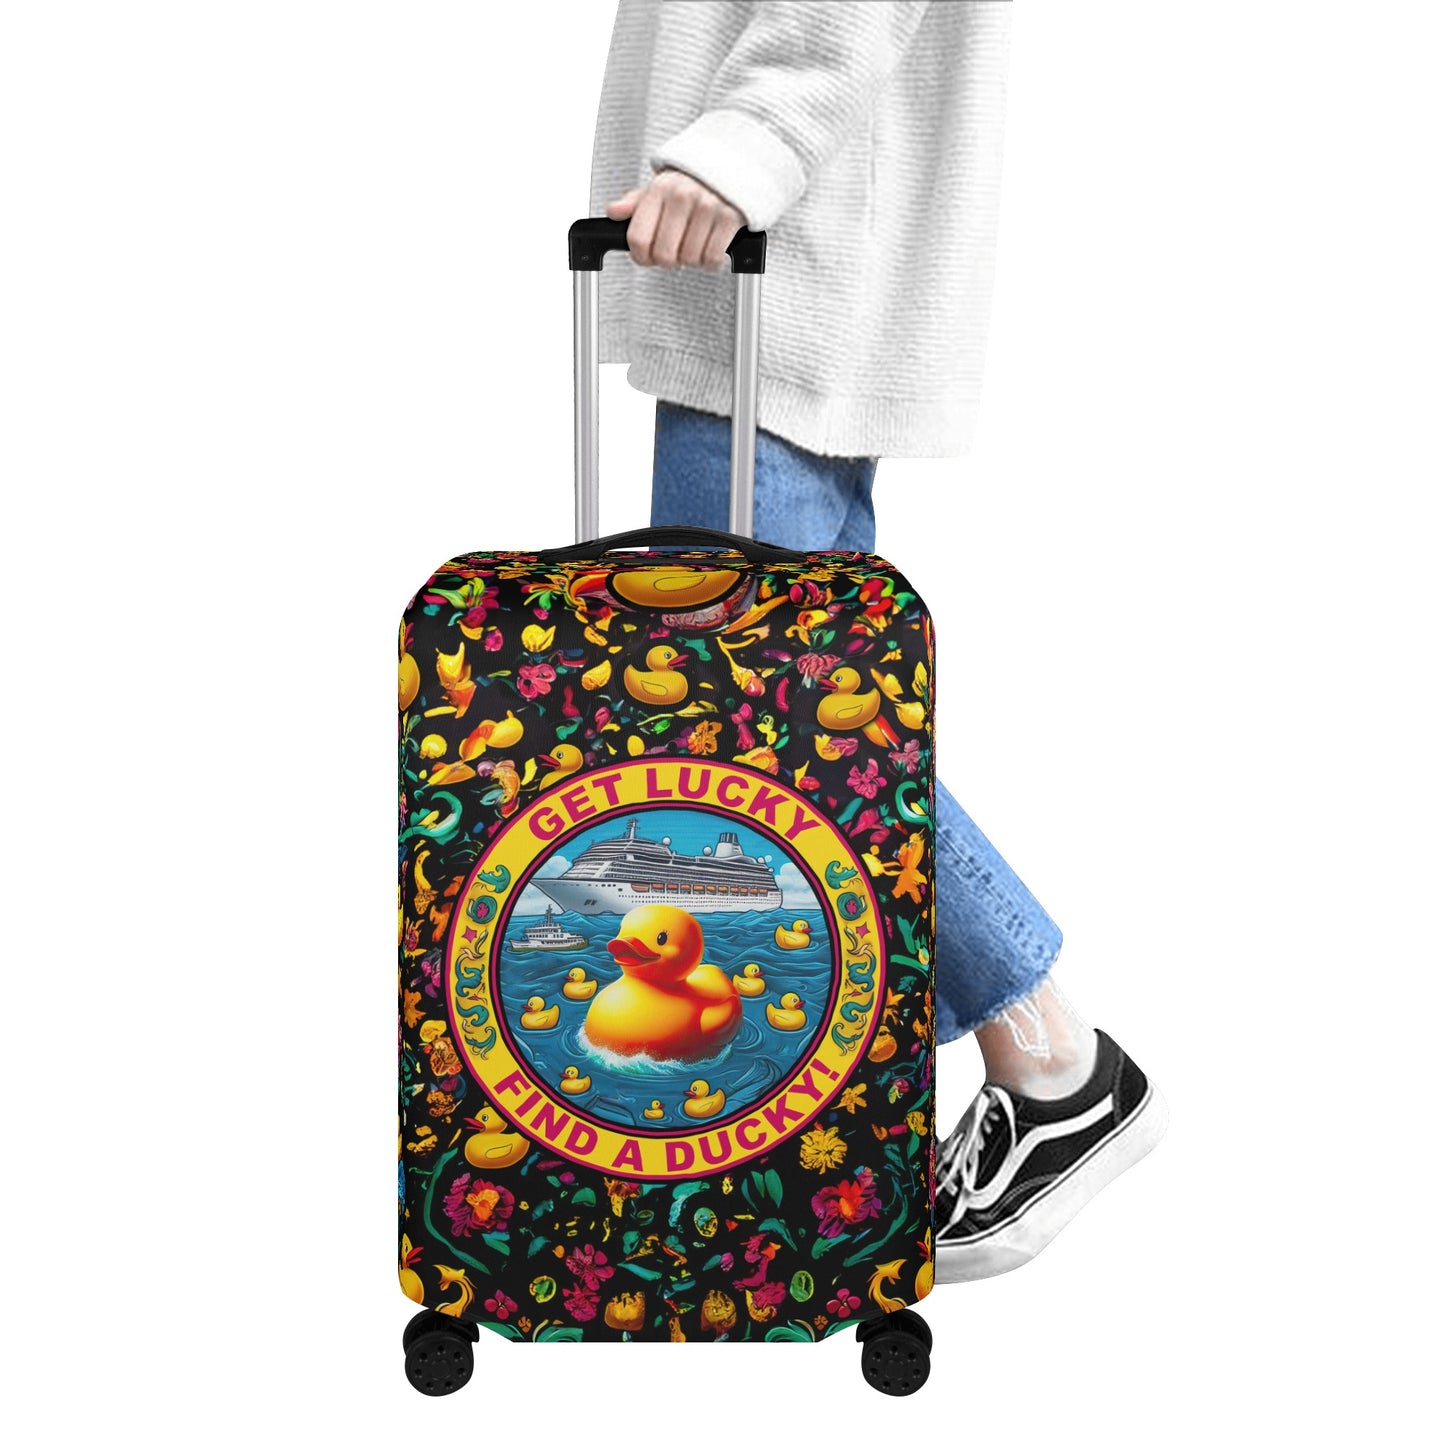 Get Lucky, Find a Ducky Luggage Cover